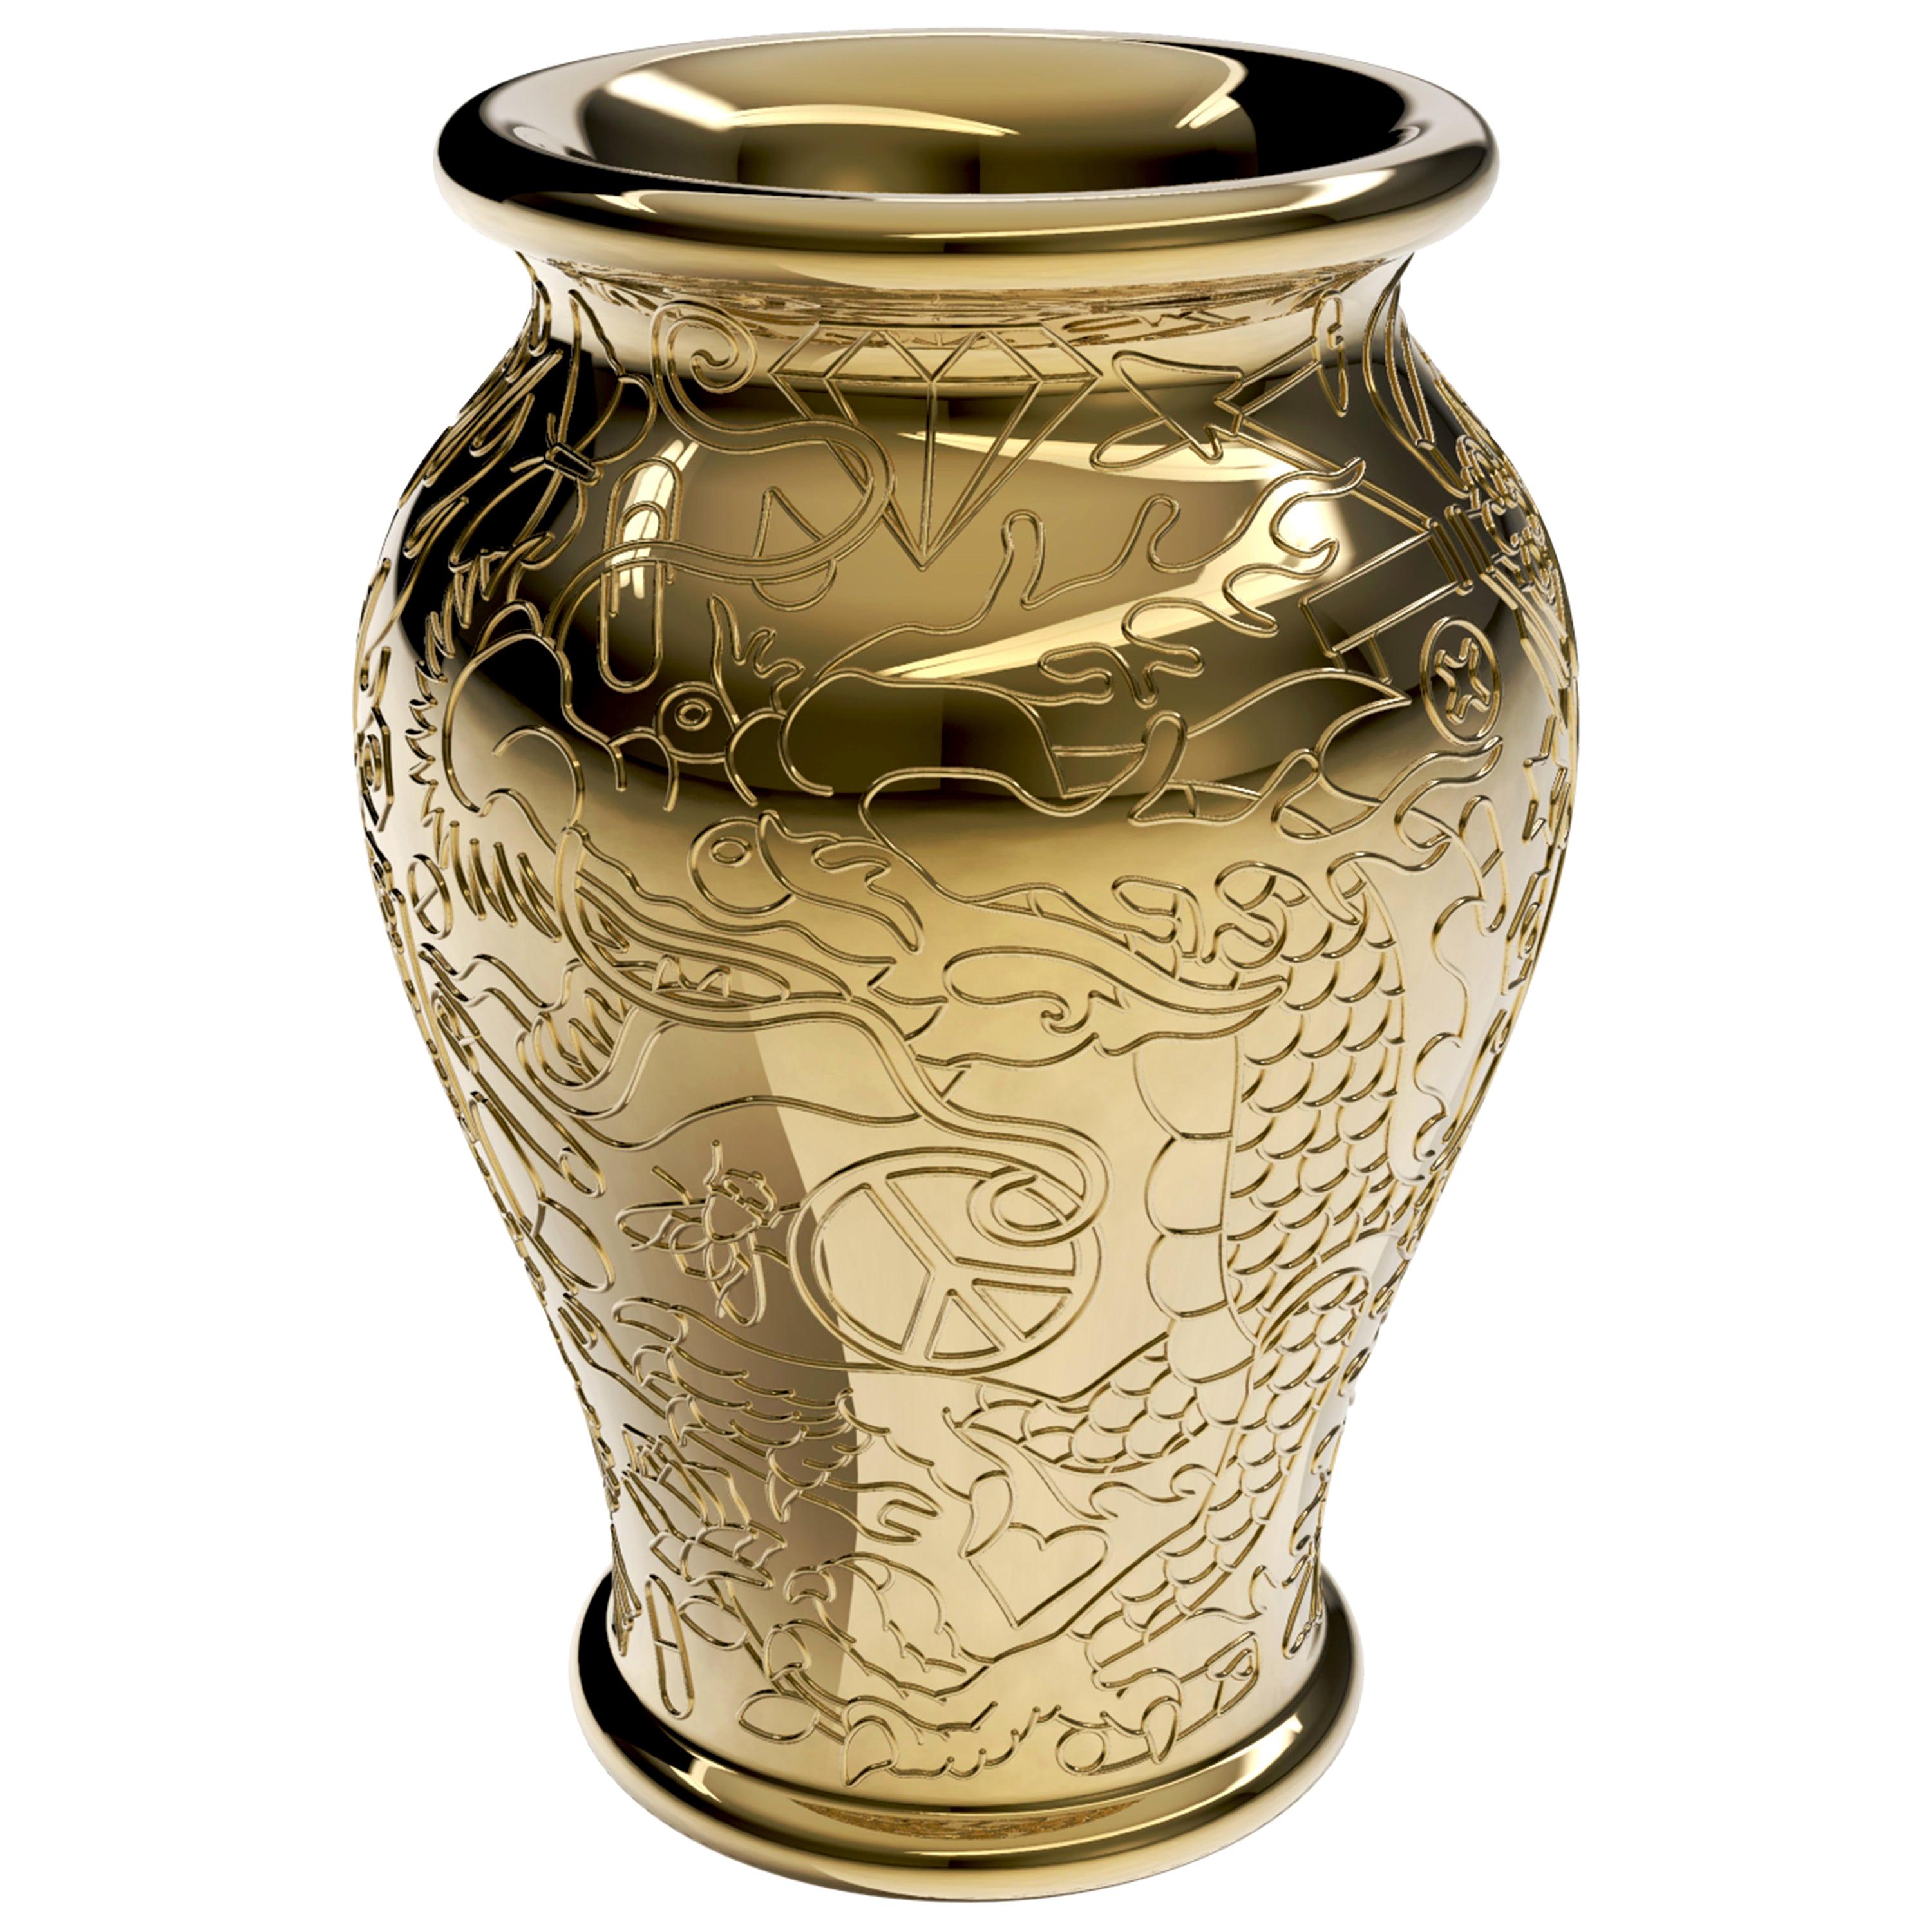 Modern Gold or Silver Mexican Chinese Inspired Planter or Champagne Cooler